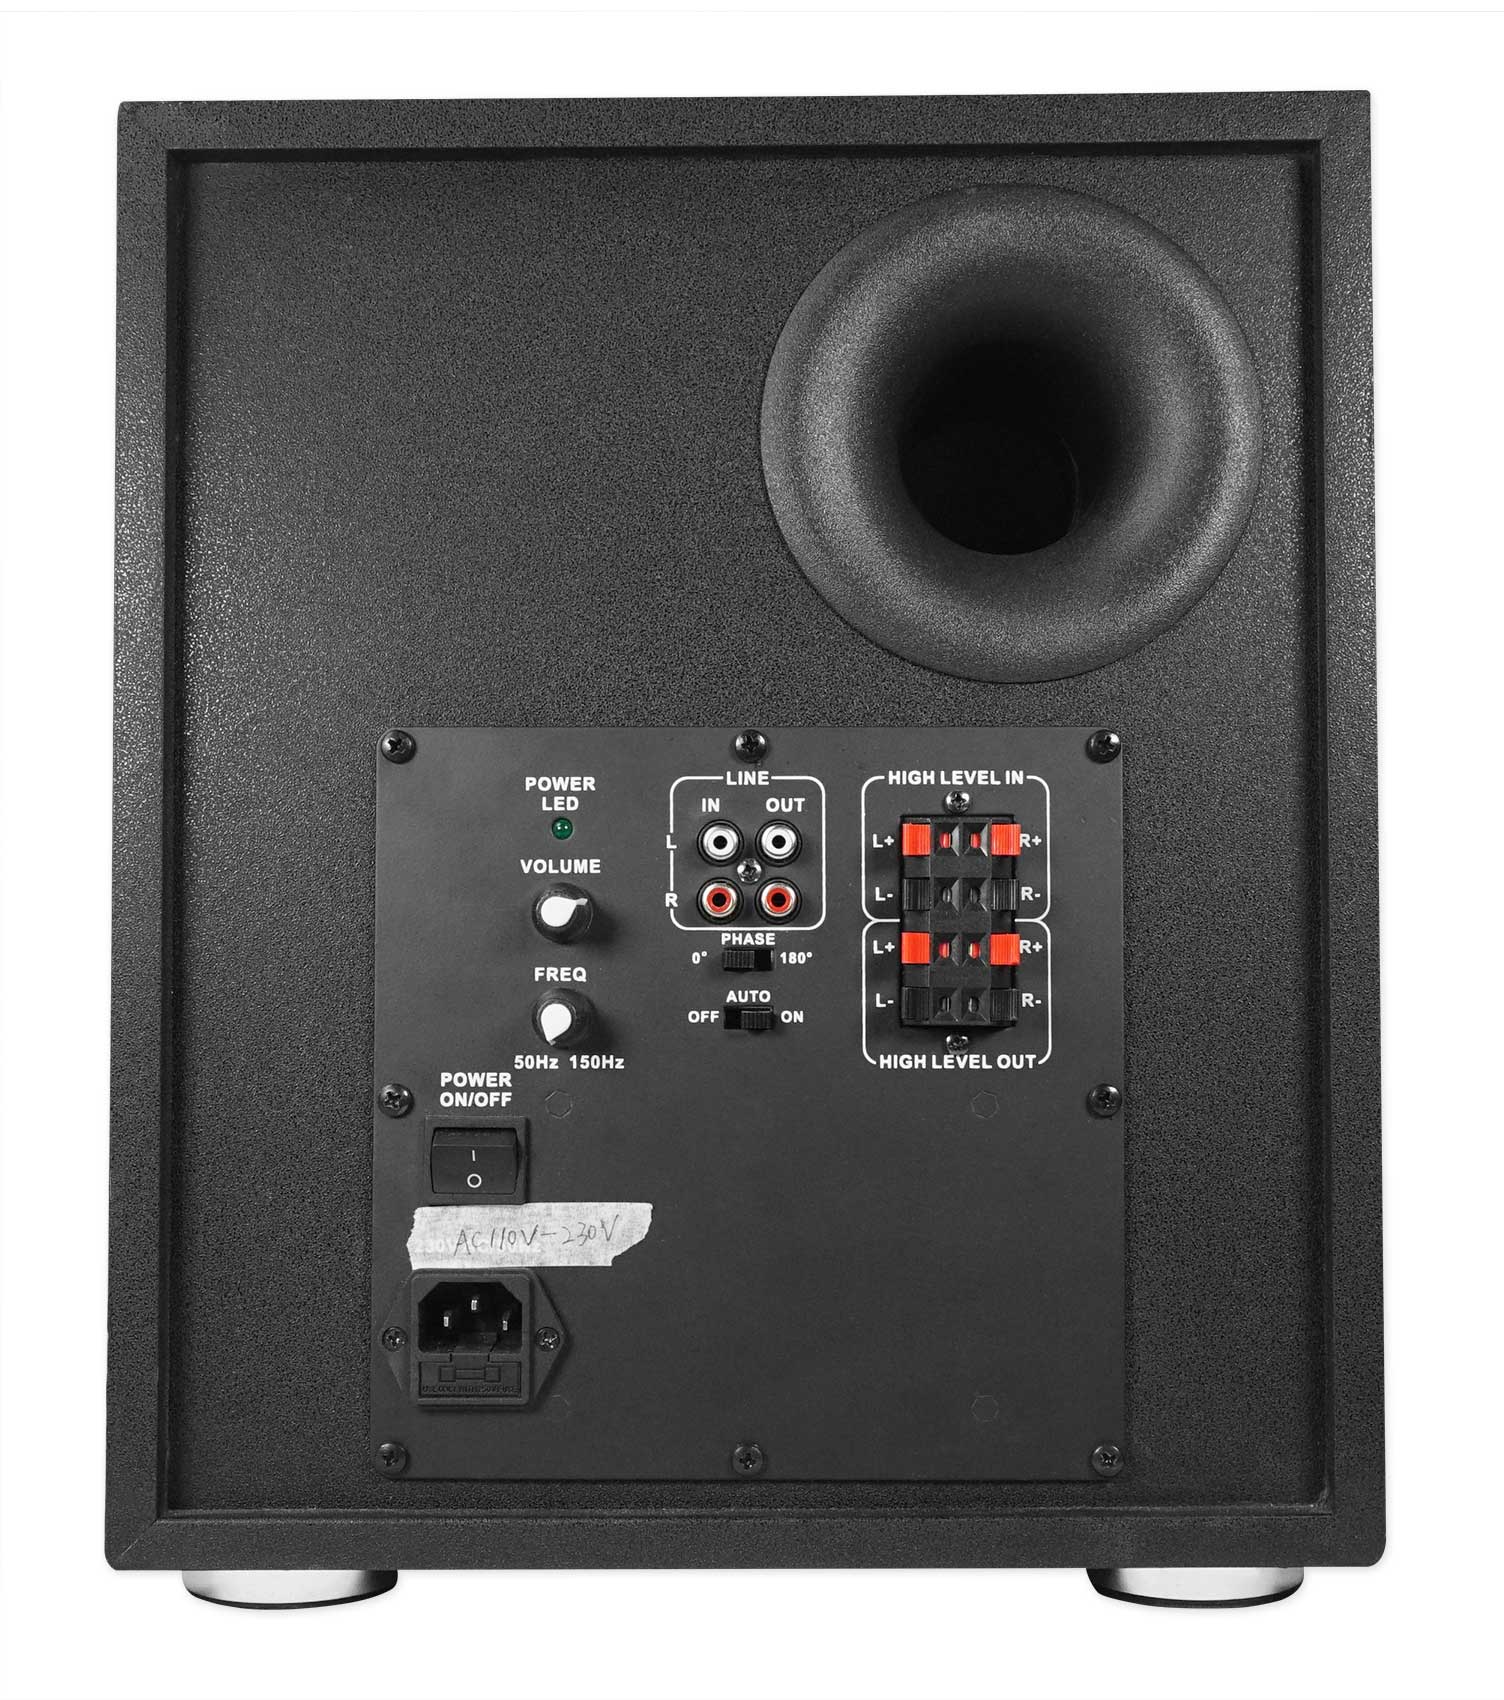 Rockville Rock Shaker 8" Inch Black 400w Powered Home Theater Subwoofer